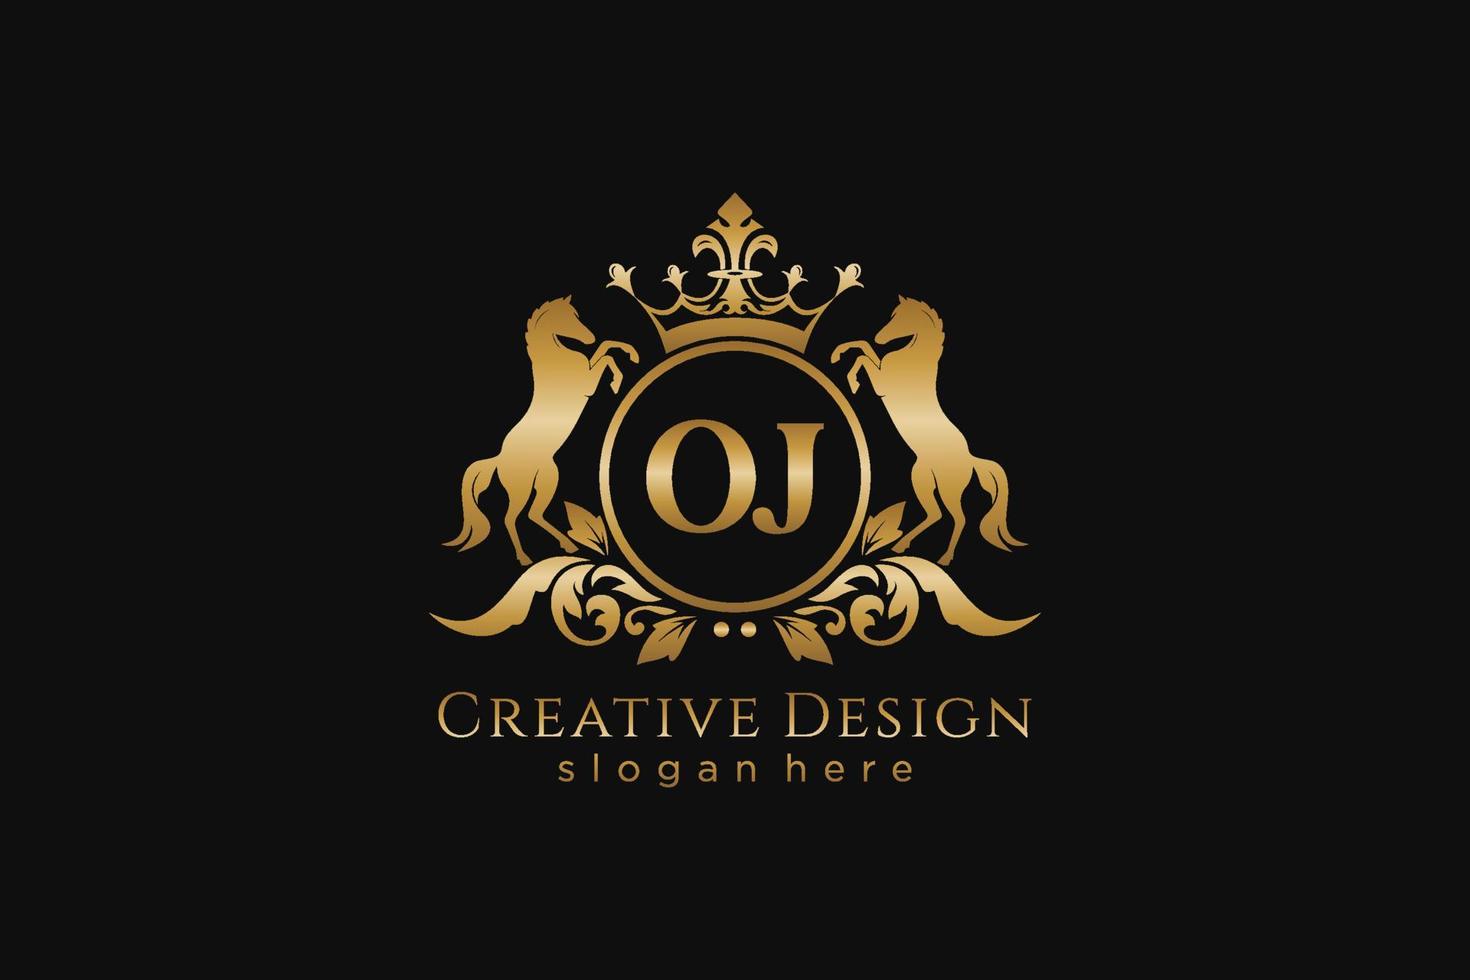 initial OJ Retro golden crest with circle and two horses, badge template with scrolls and royal crown - perfect for luxurious branding projects vector